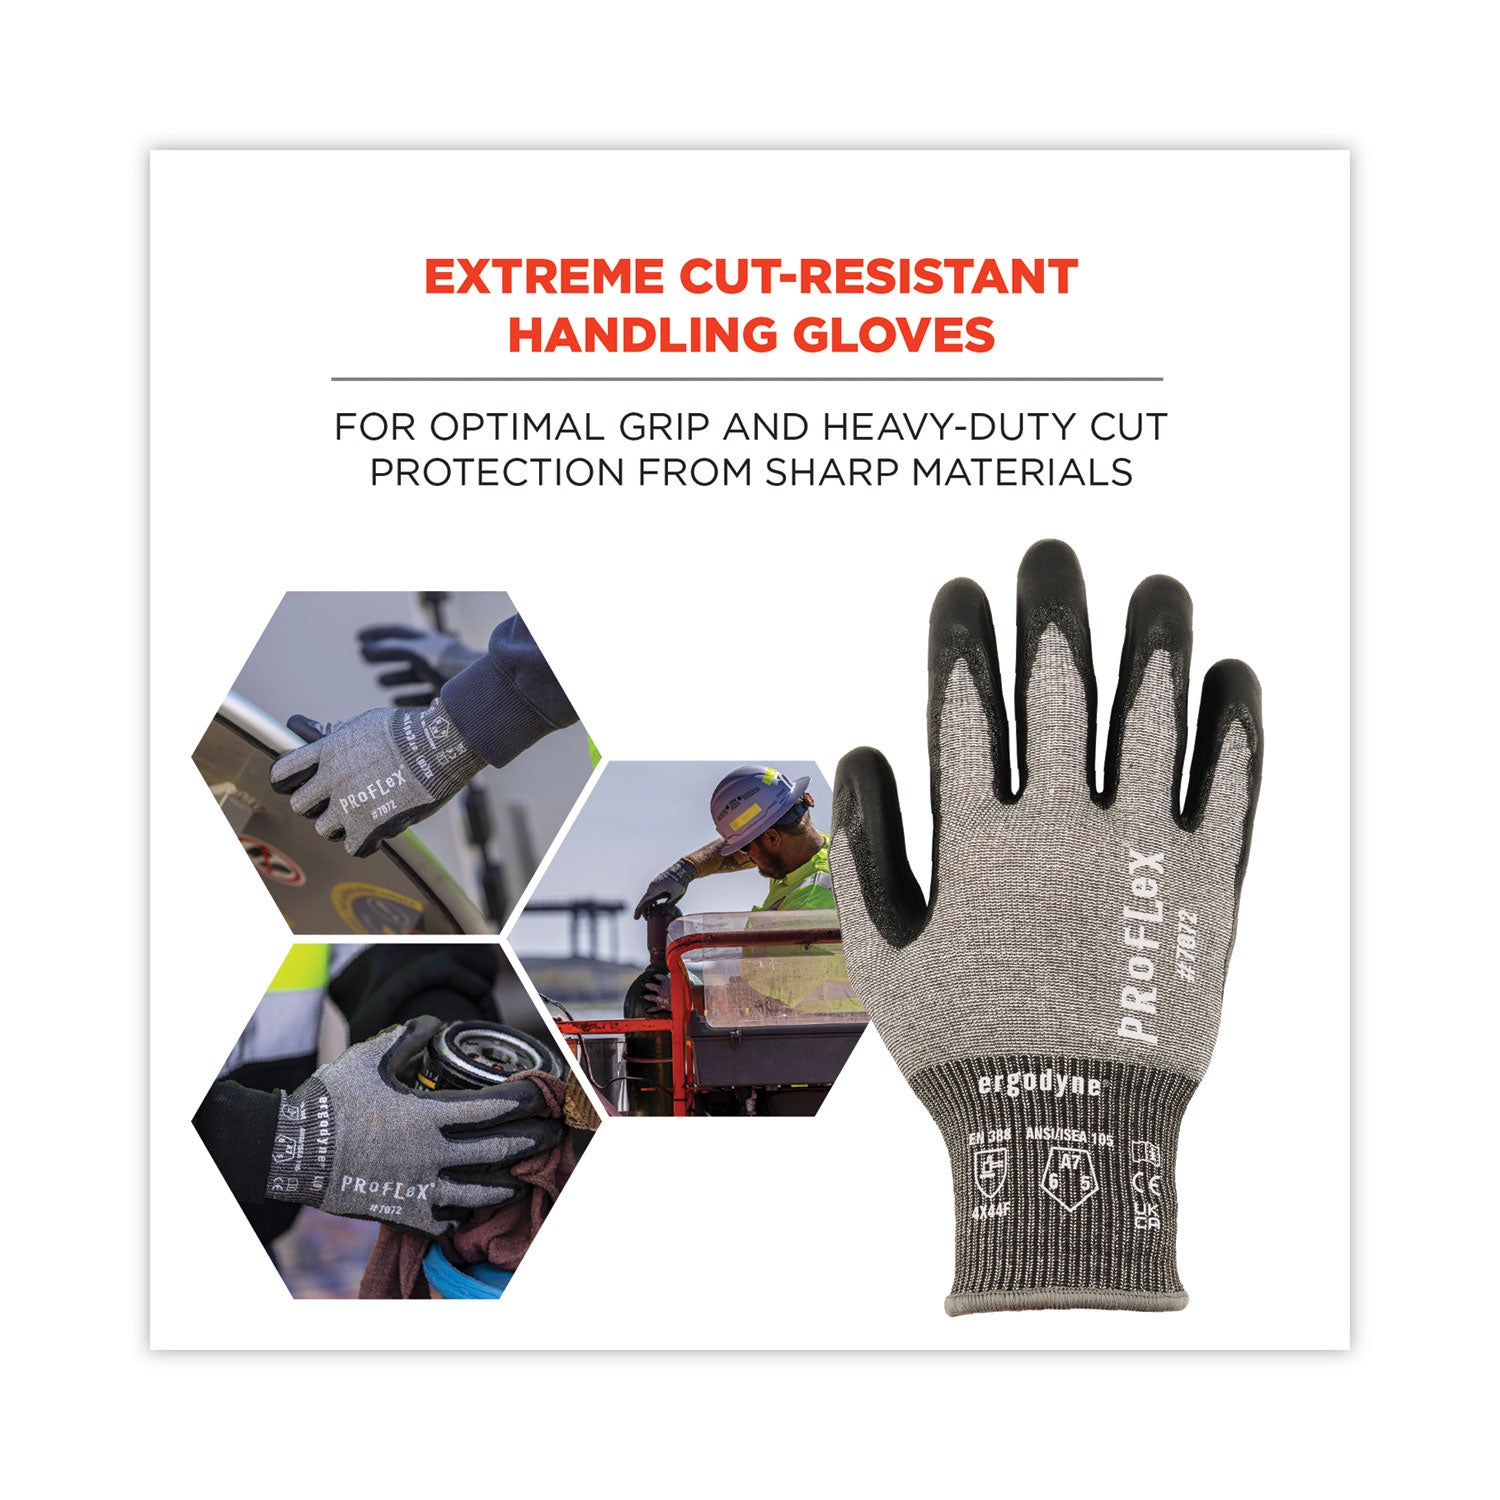 proflex-7072-ansi-a7-nitrile-coated-cr-gloves-gray-x-large-12-pairs-pack-ships-in-1-3-business-days_ego10305 - 5